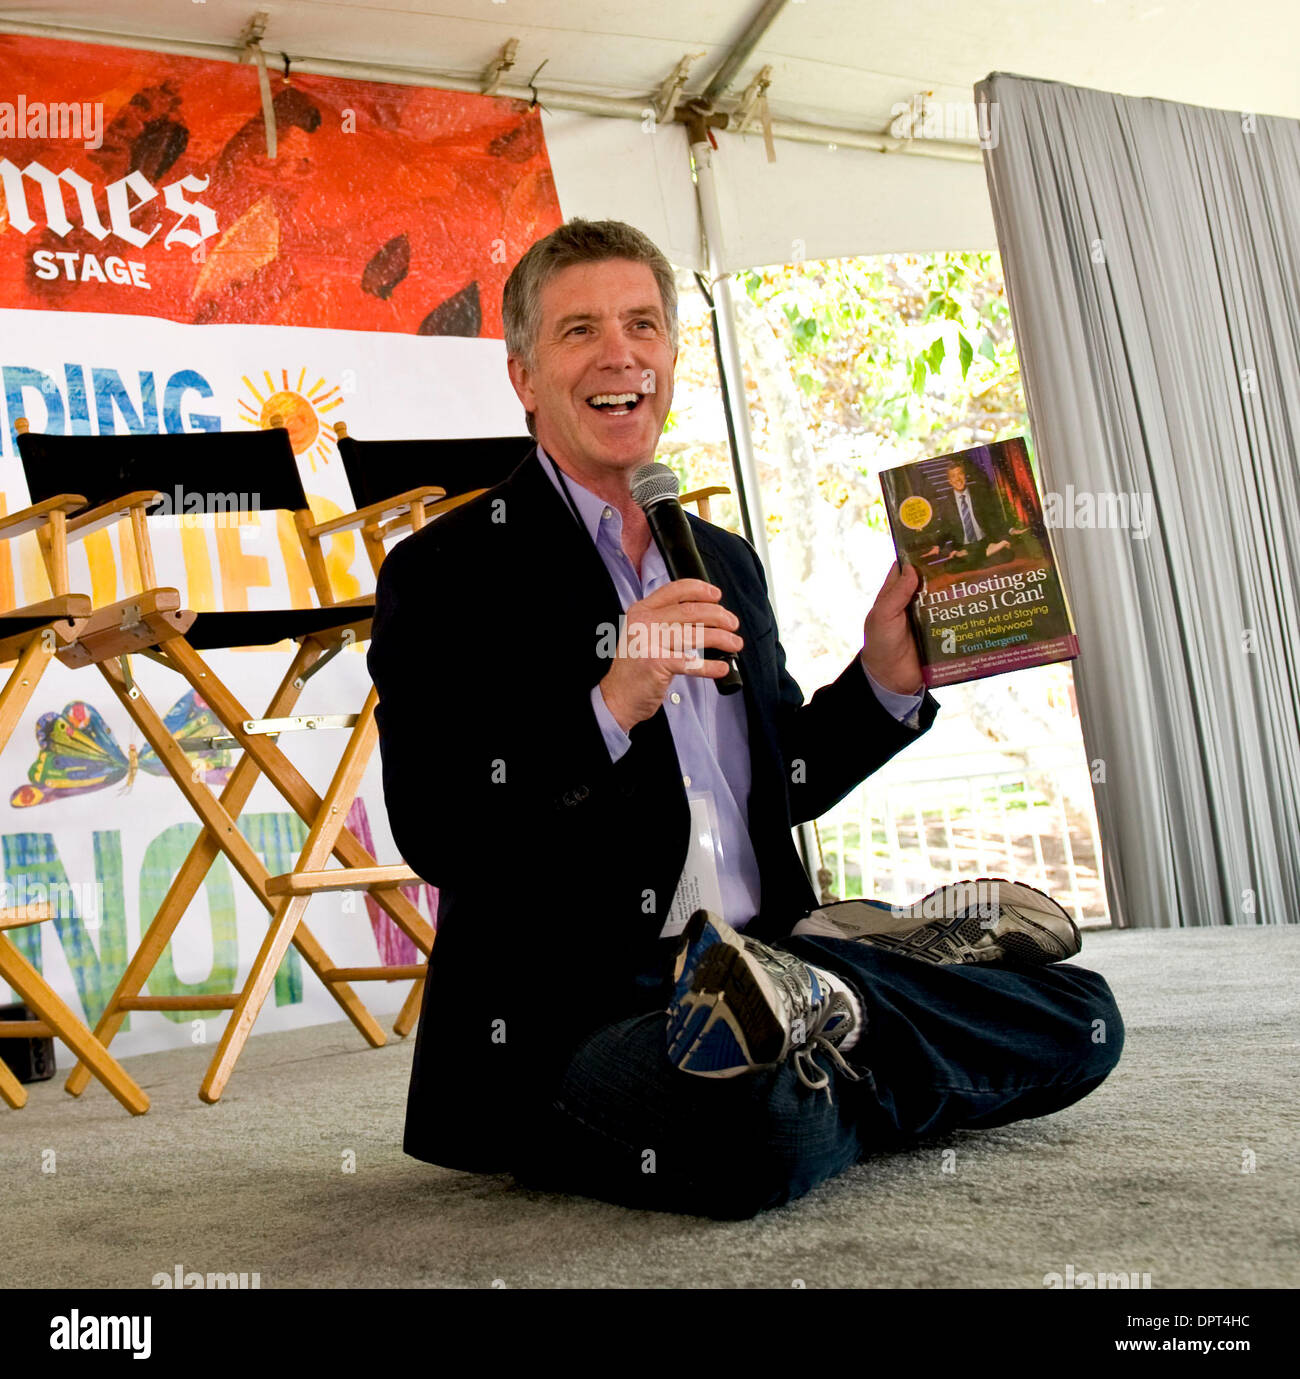 April 25, 2009 - Los Angeles, California, USA - TOM BERGERON, host of 'Dancing With the Stars,' briefly assumes the lotus position to speak about his book 'I'm Hosting As Fast As I Can: Zen and the Art of Staying Sane in Hollywood,' at the Los Angeles Times Festival of Books on the campus of the University of California at Los Angeles. (Credit: © Brian Cahn/ZUMA Press) Stock Photo